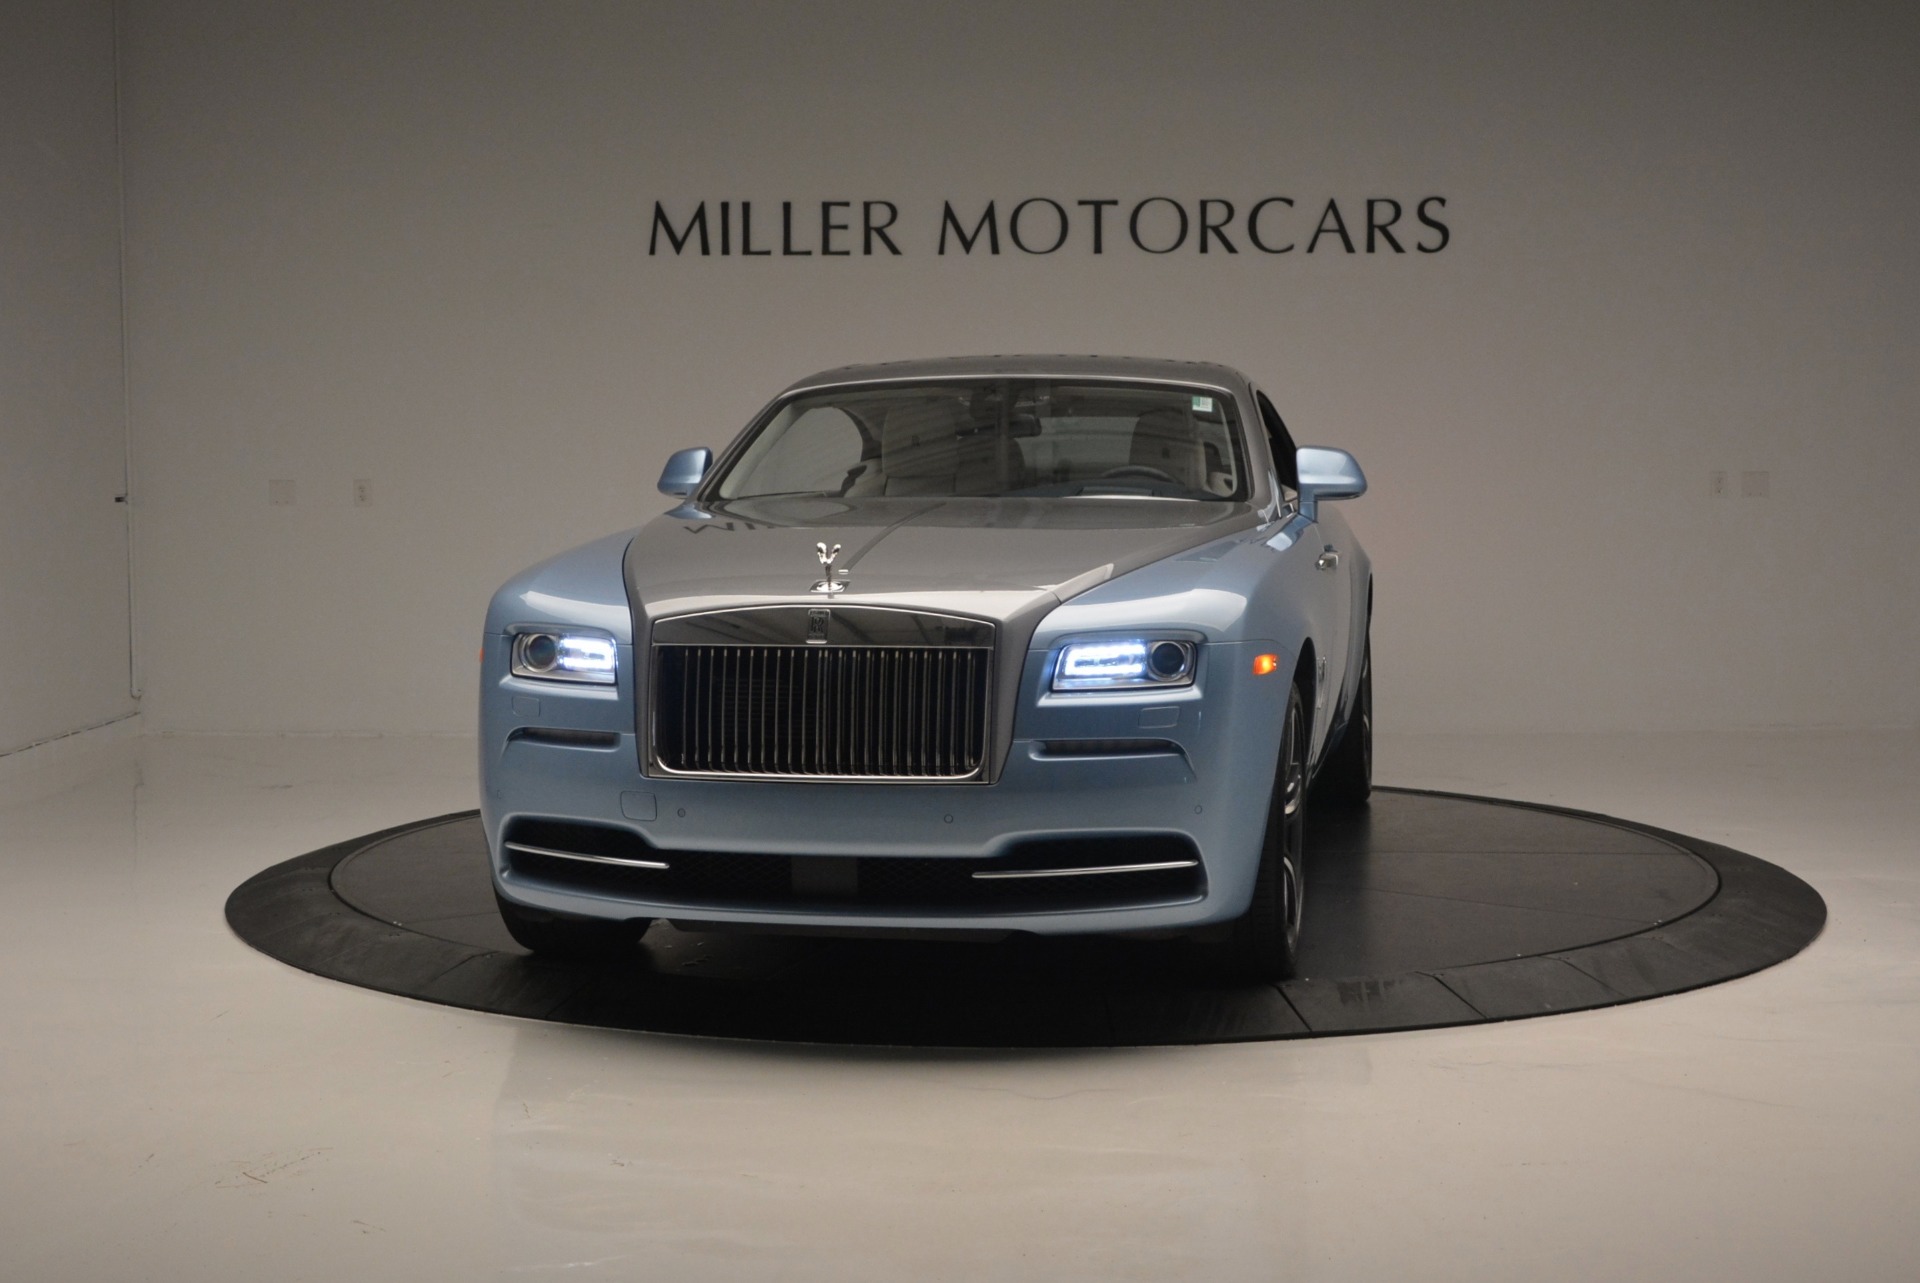 Used 2015 RollsRoyce Wraith for Sale in Newark DE Test Drive at Home   Kelley Blue Book